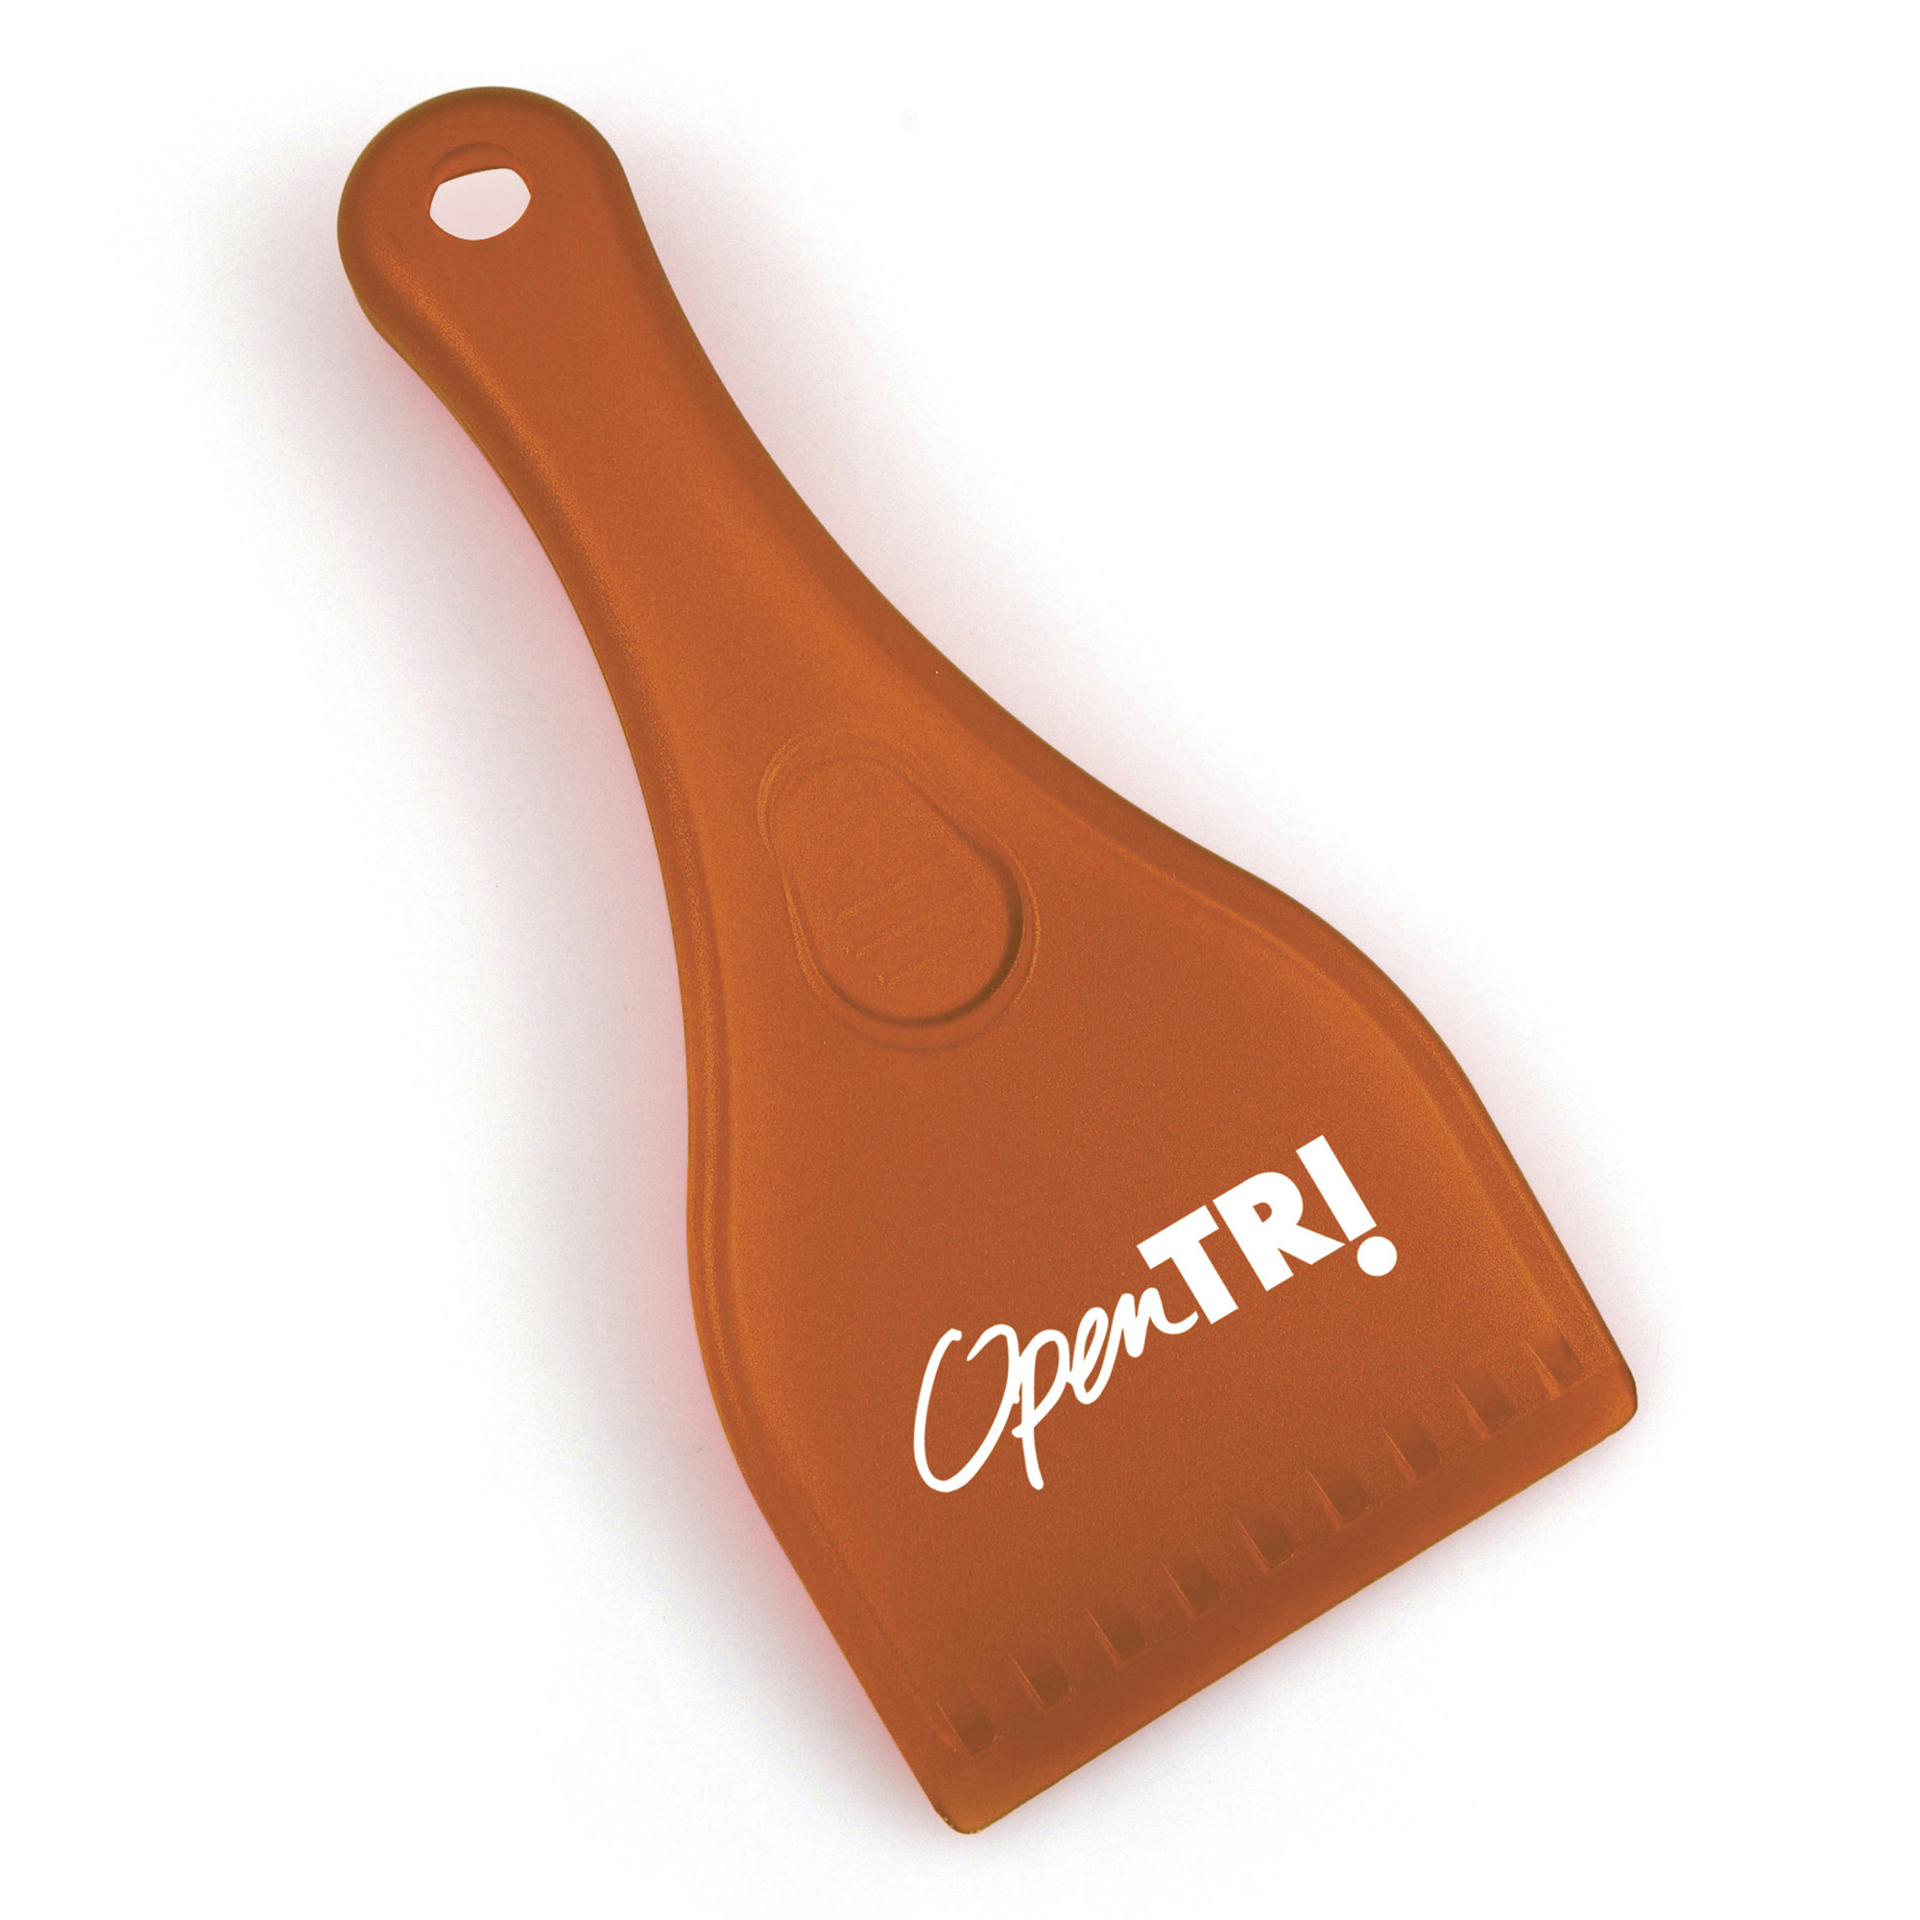 ice scraper with handle in orange with a white logo